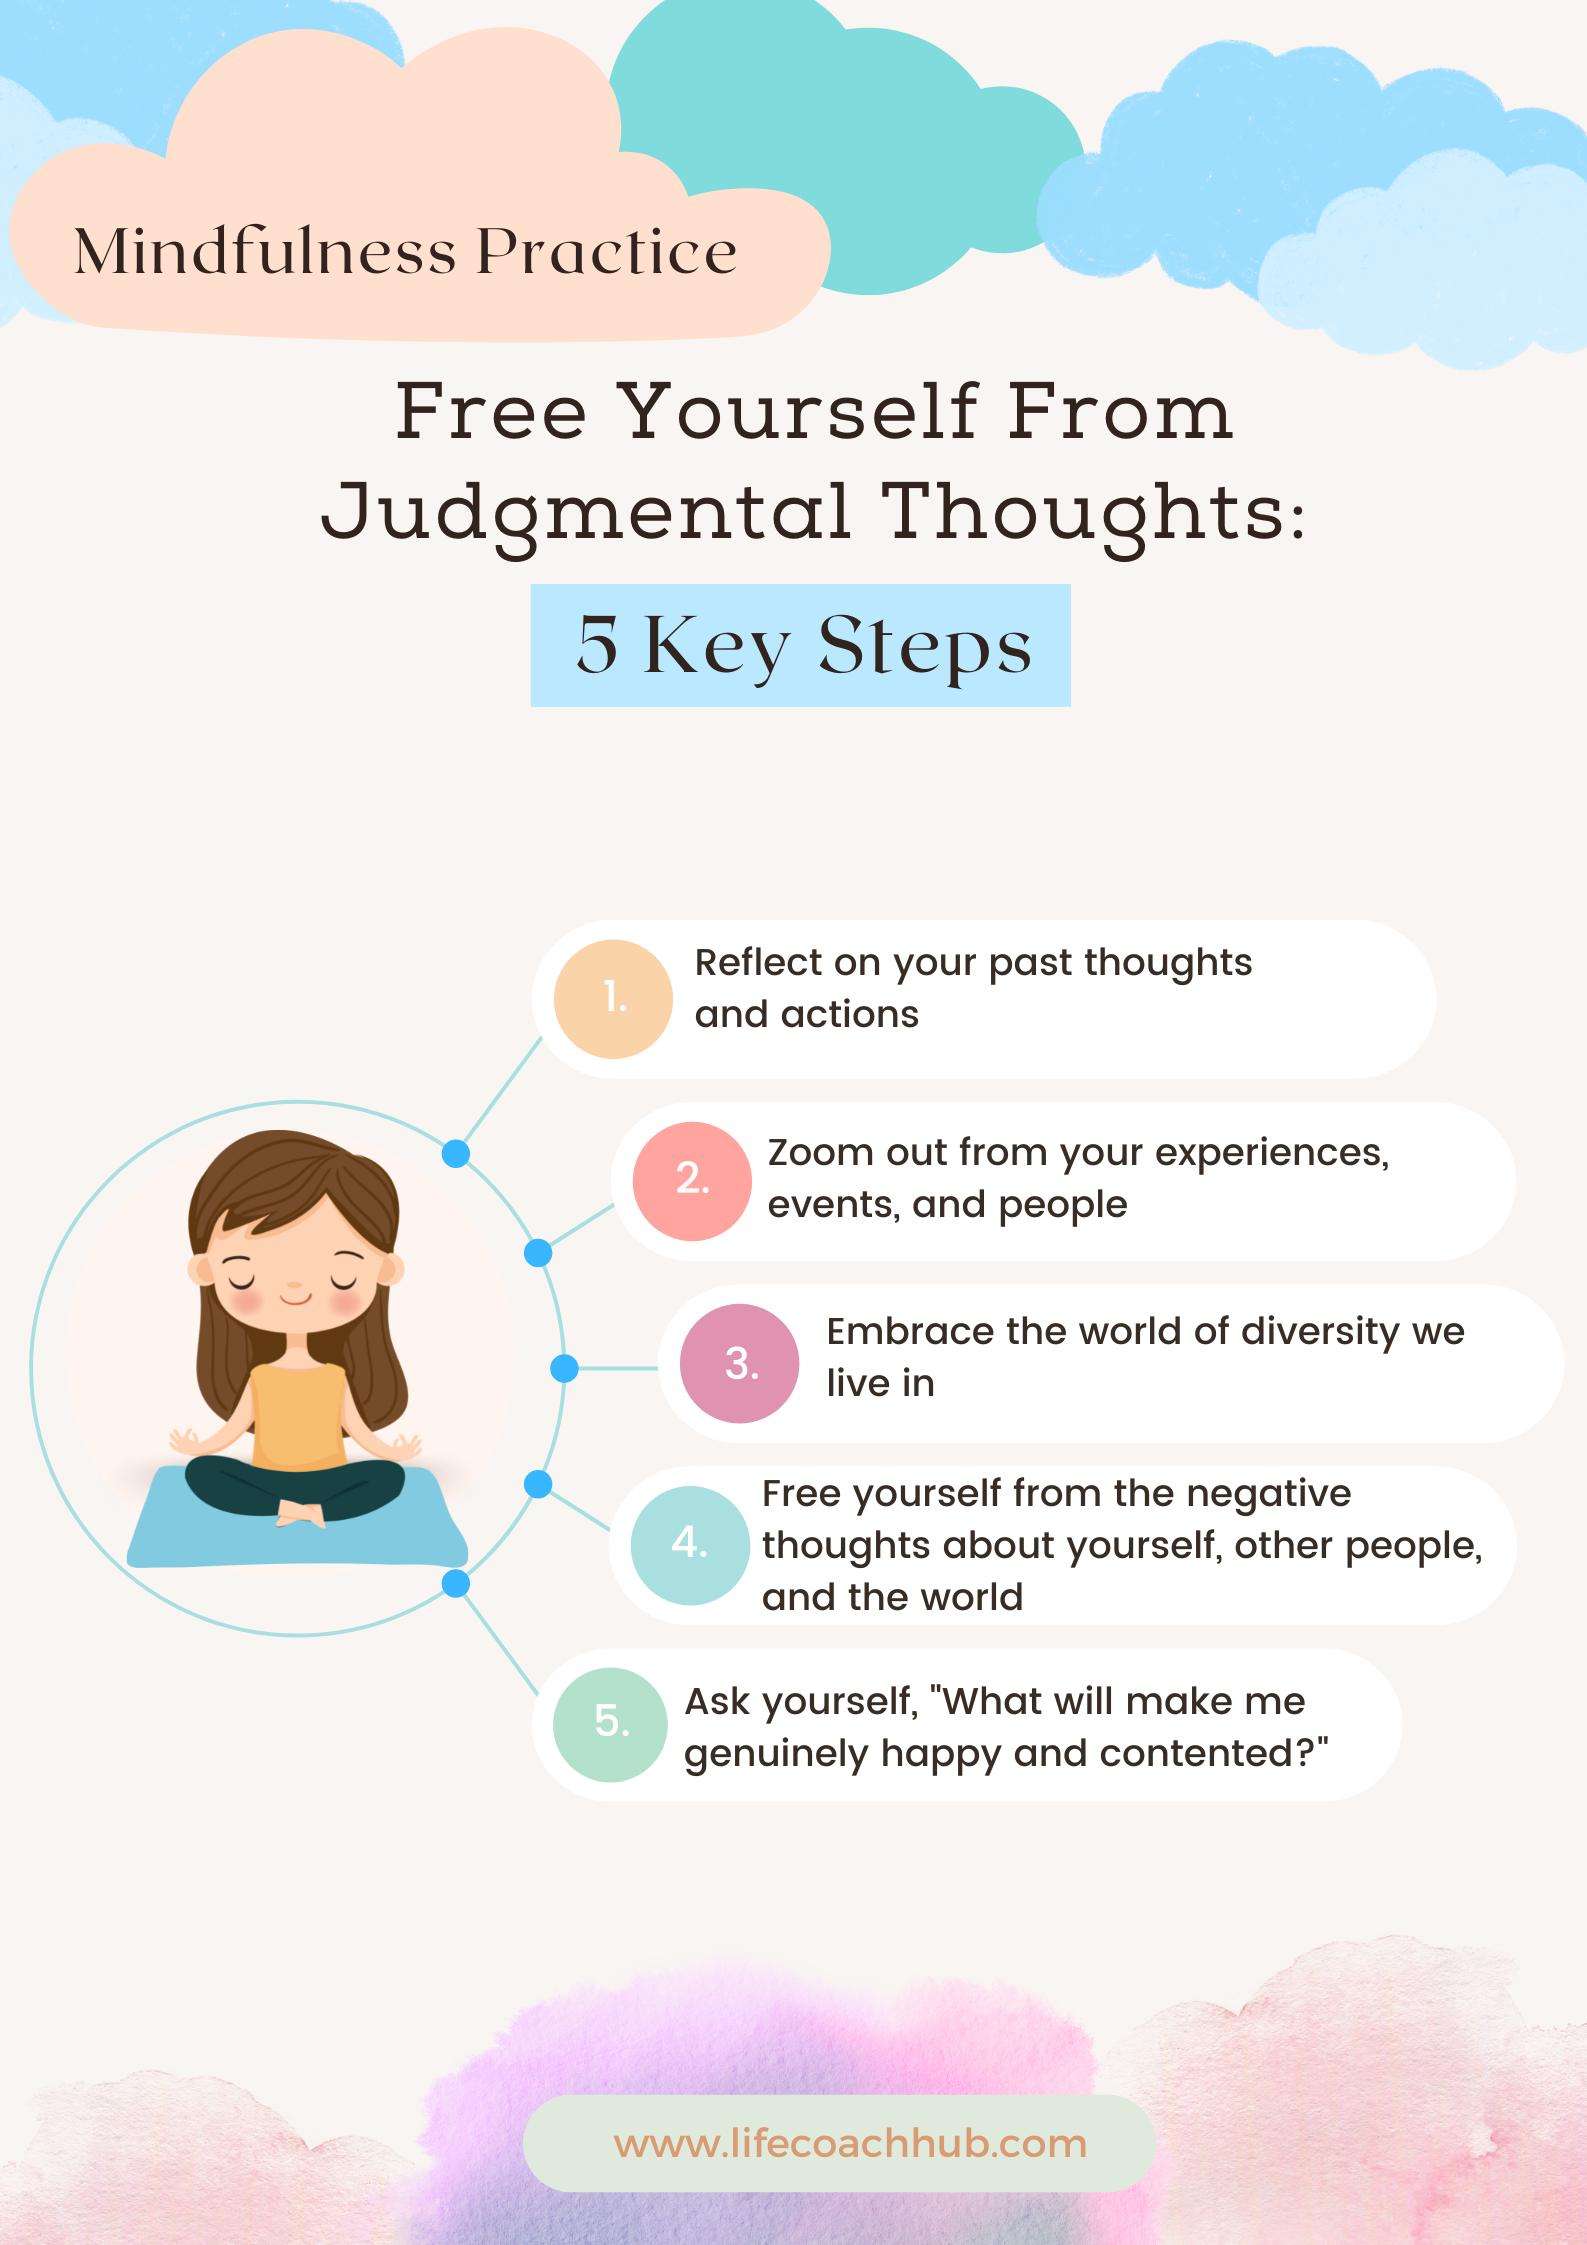 Mindfulness practice to break free from judgmental thoughts